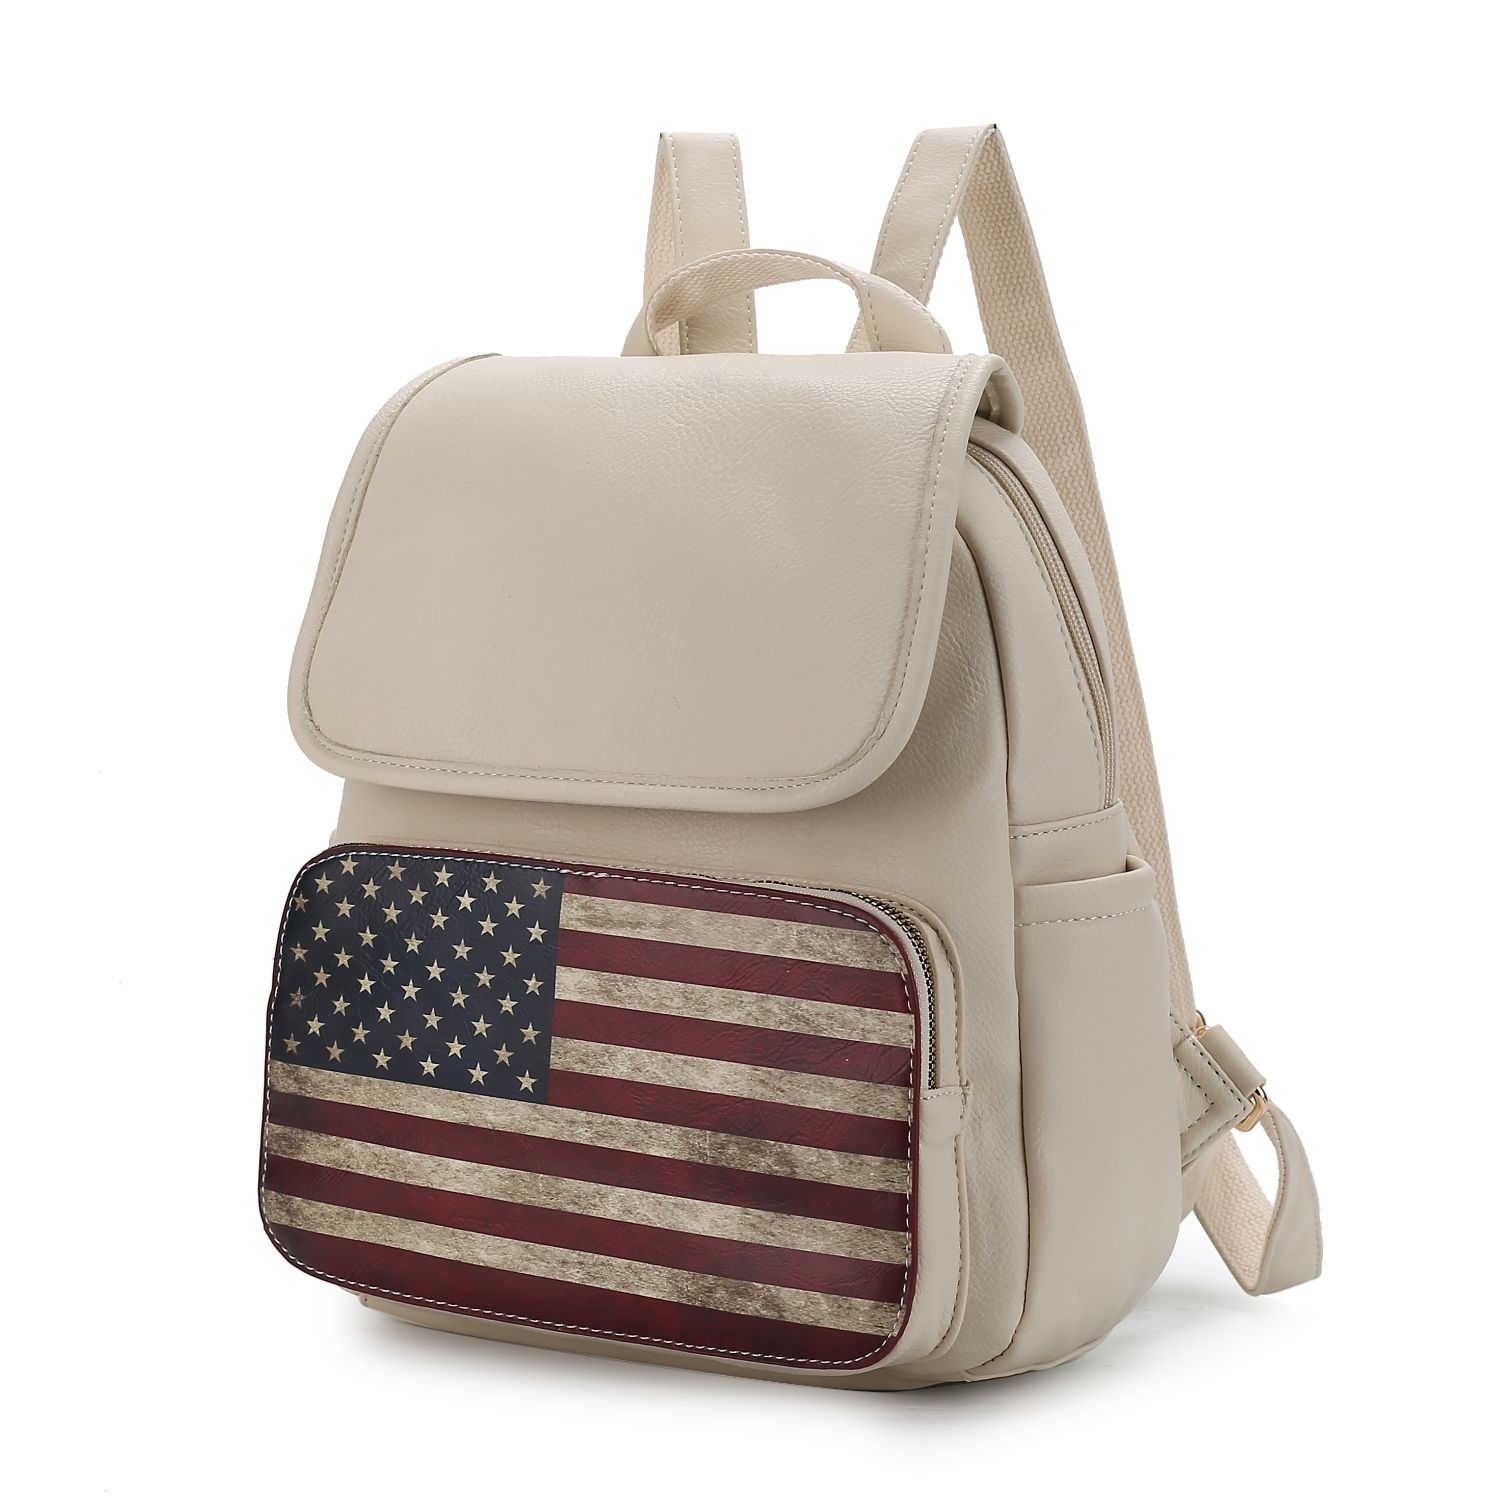 MKF Collection Regina Printed Flag Vegan Leather Womens Backpack By Mia K - Navy